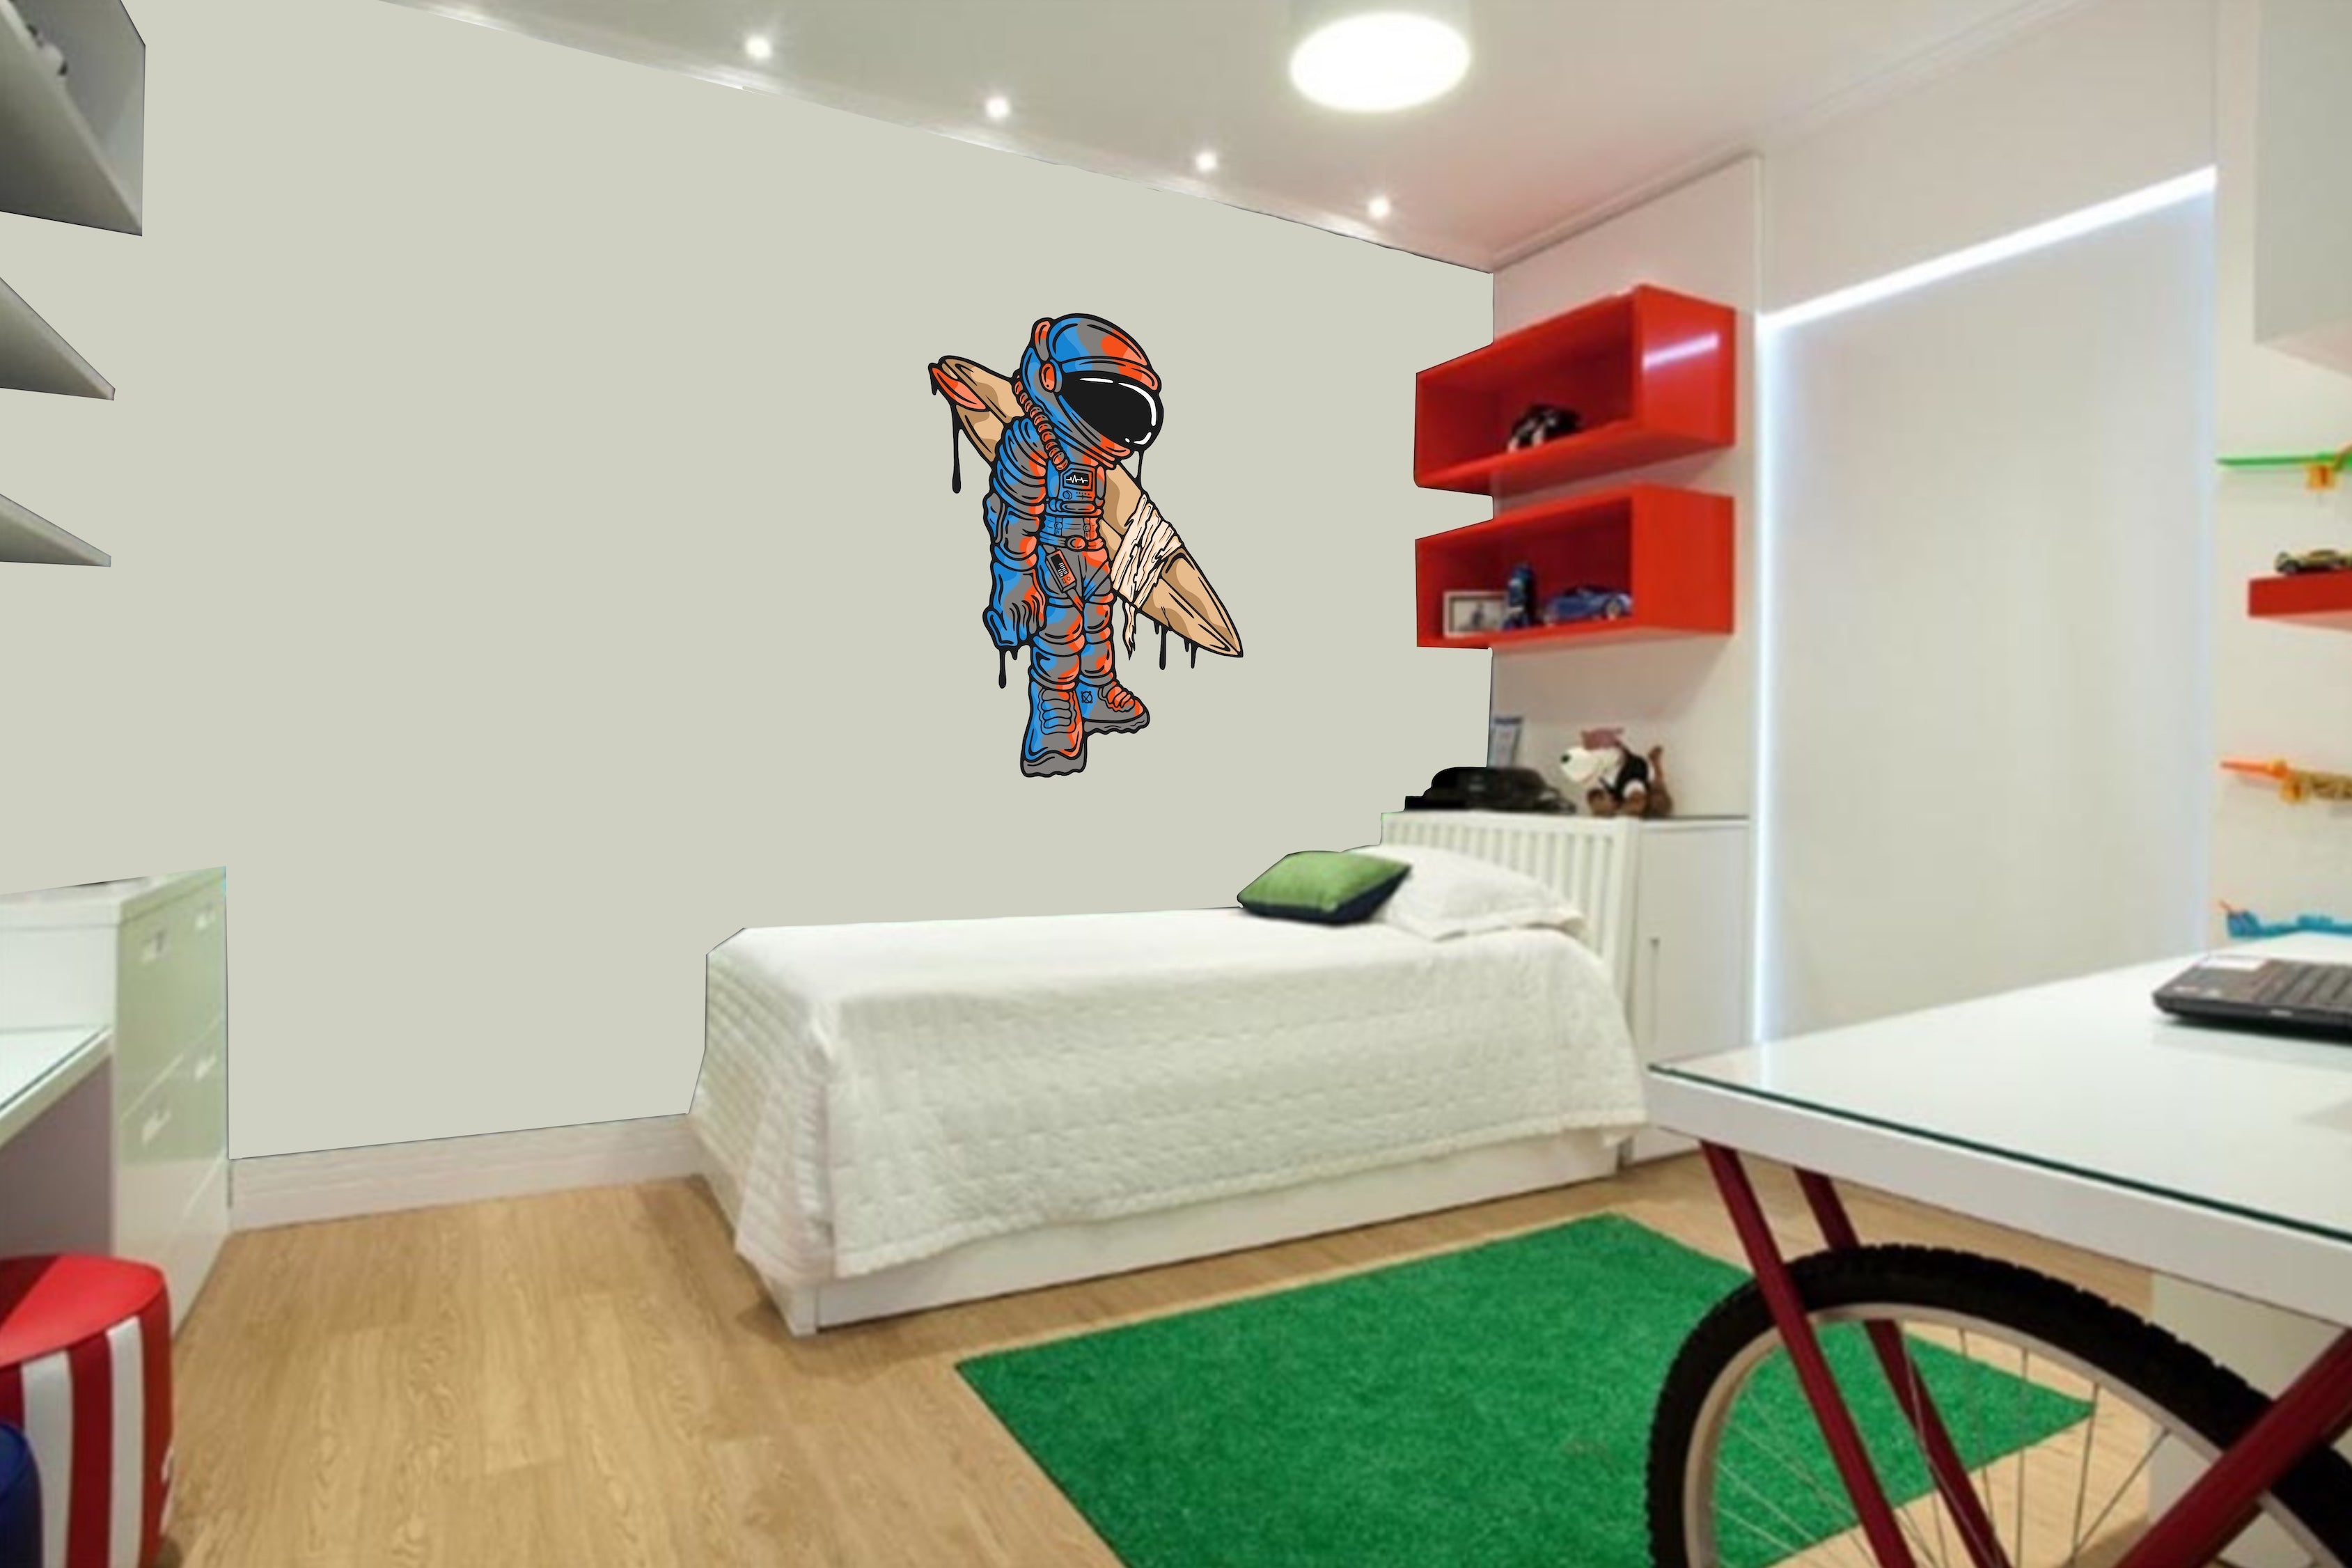 Wall Art Decal - Astro Dude